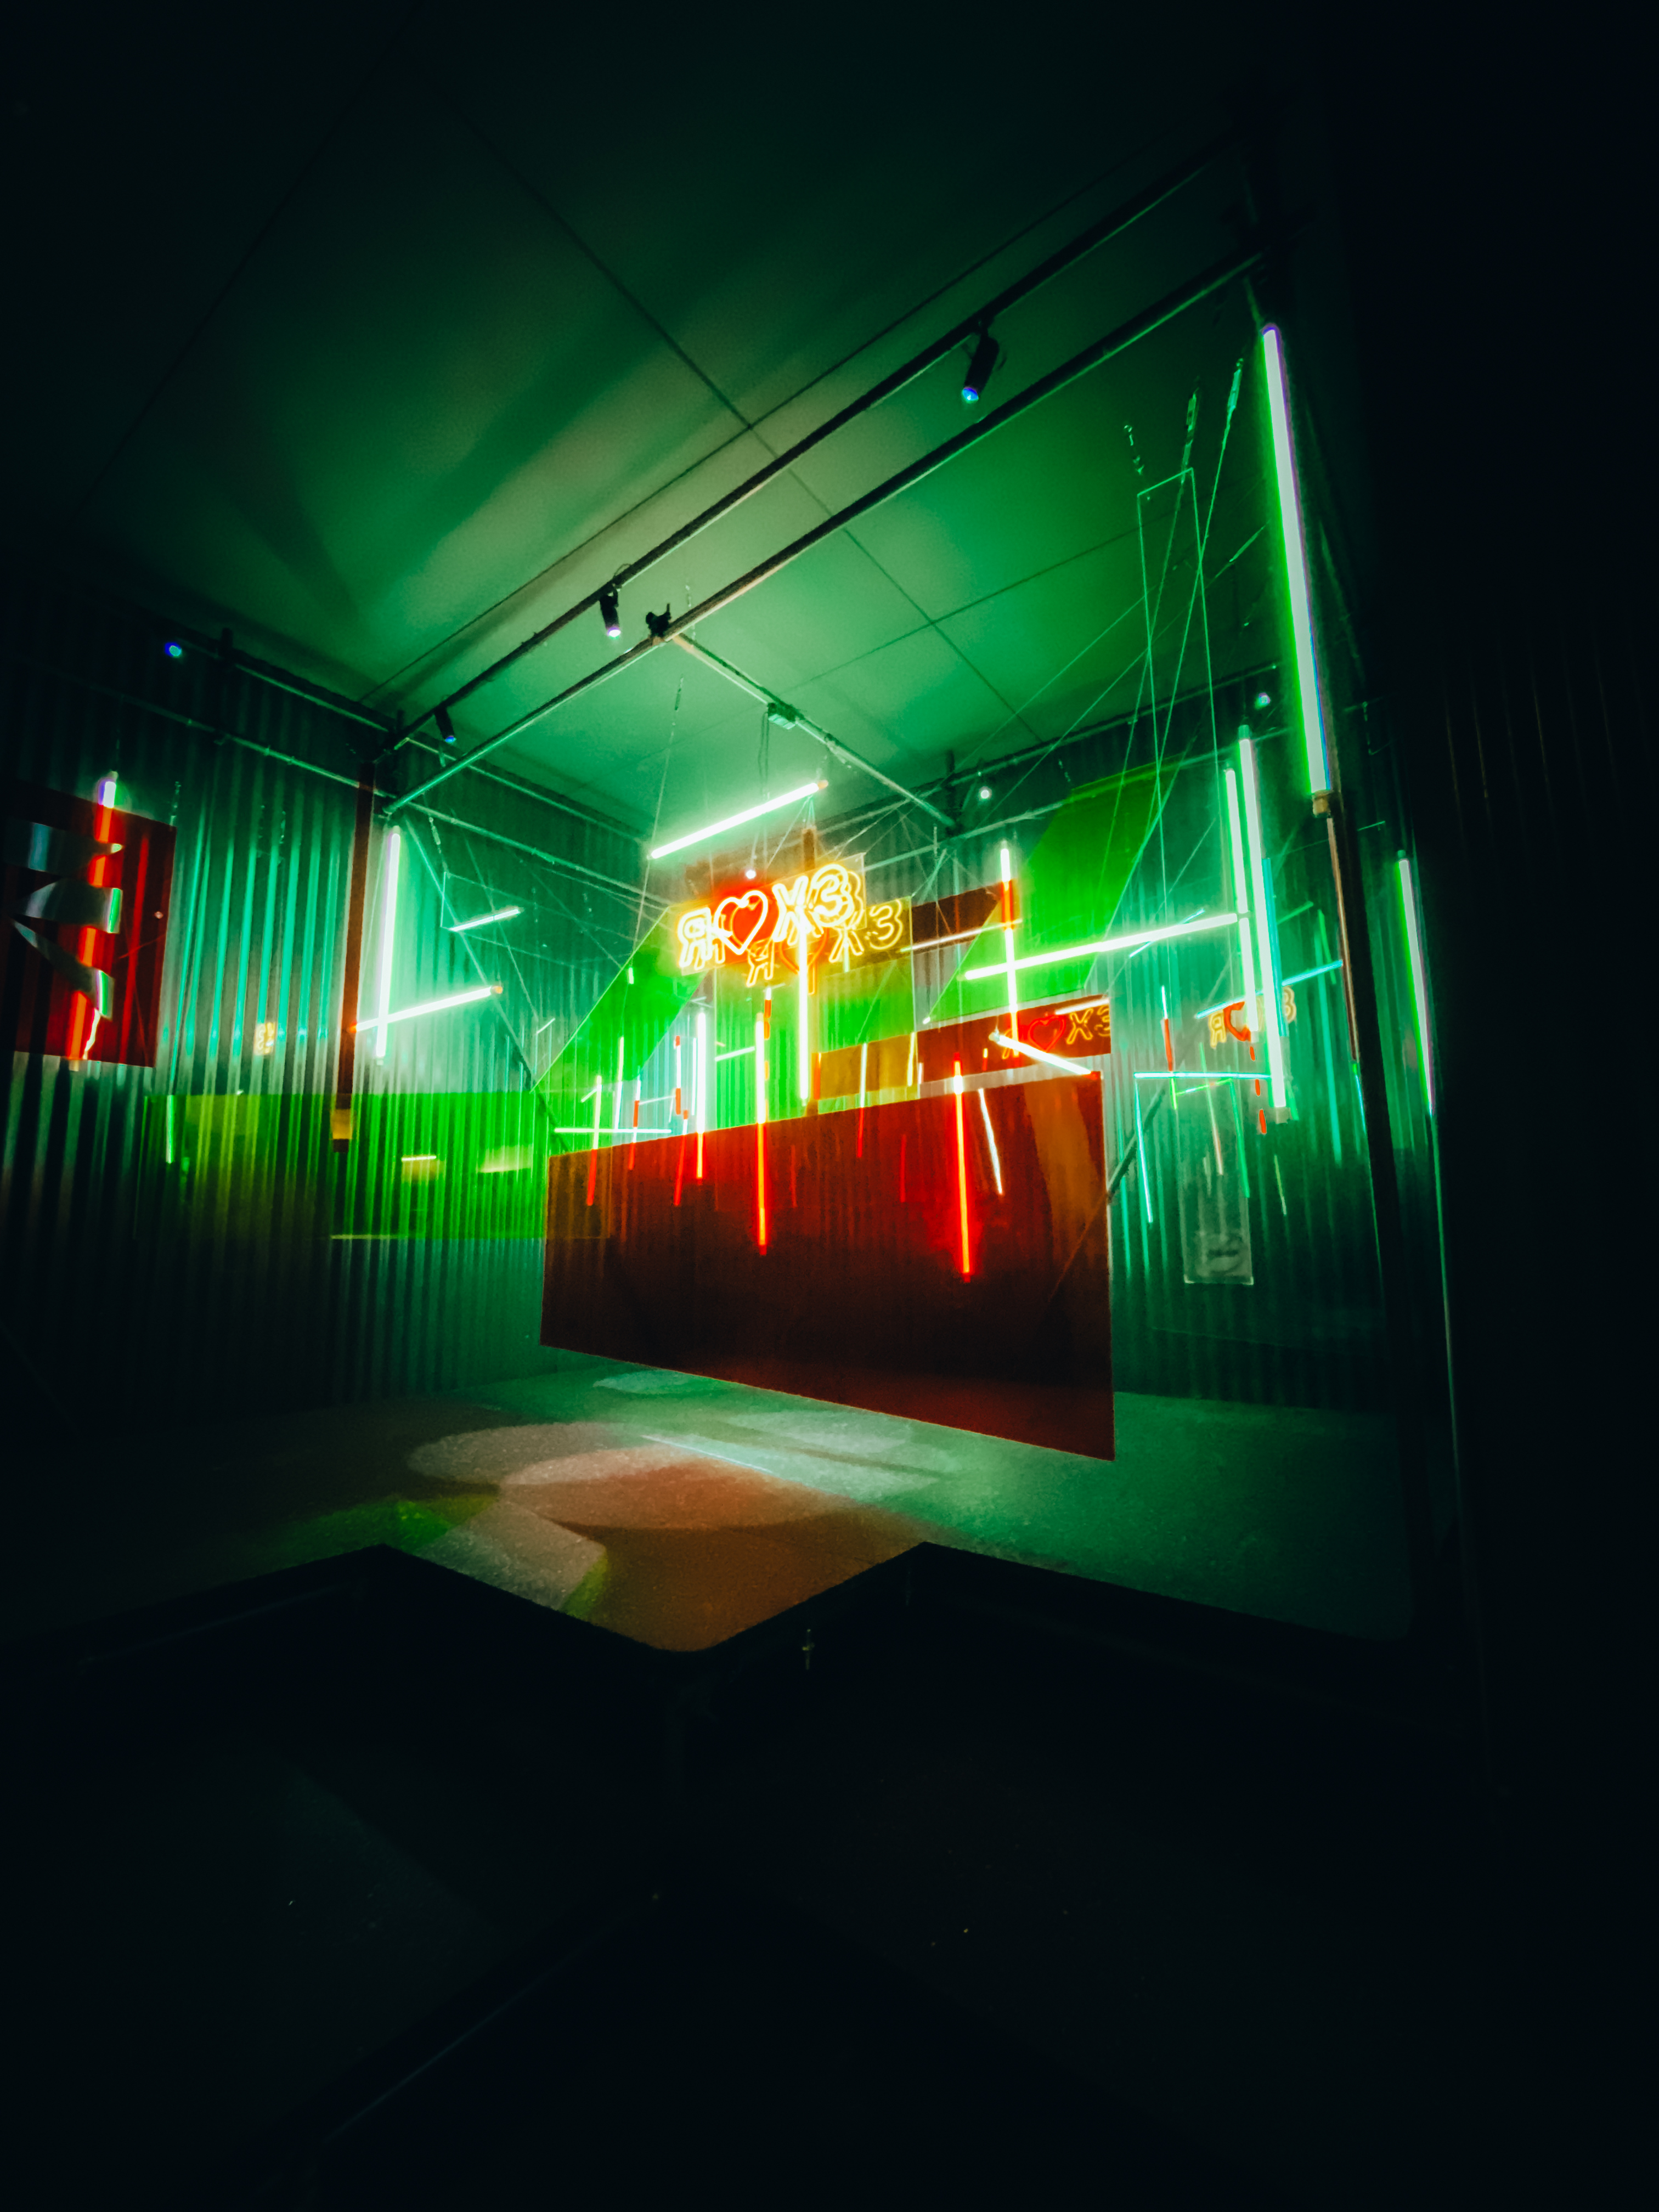 A room with neon lights showcasing the colors green and red.